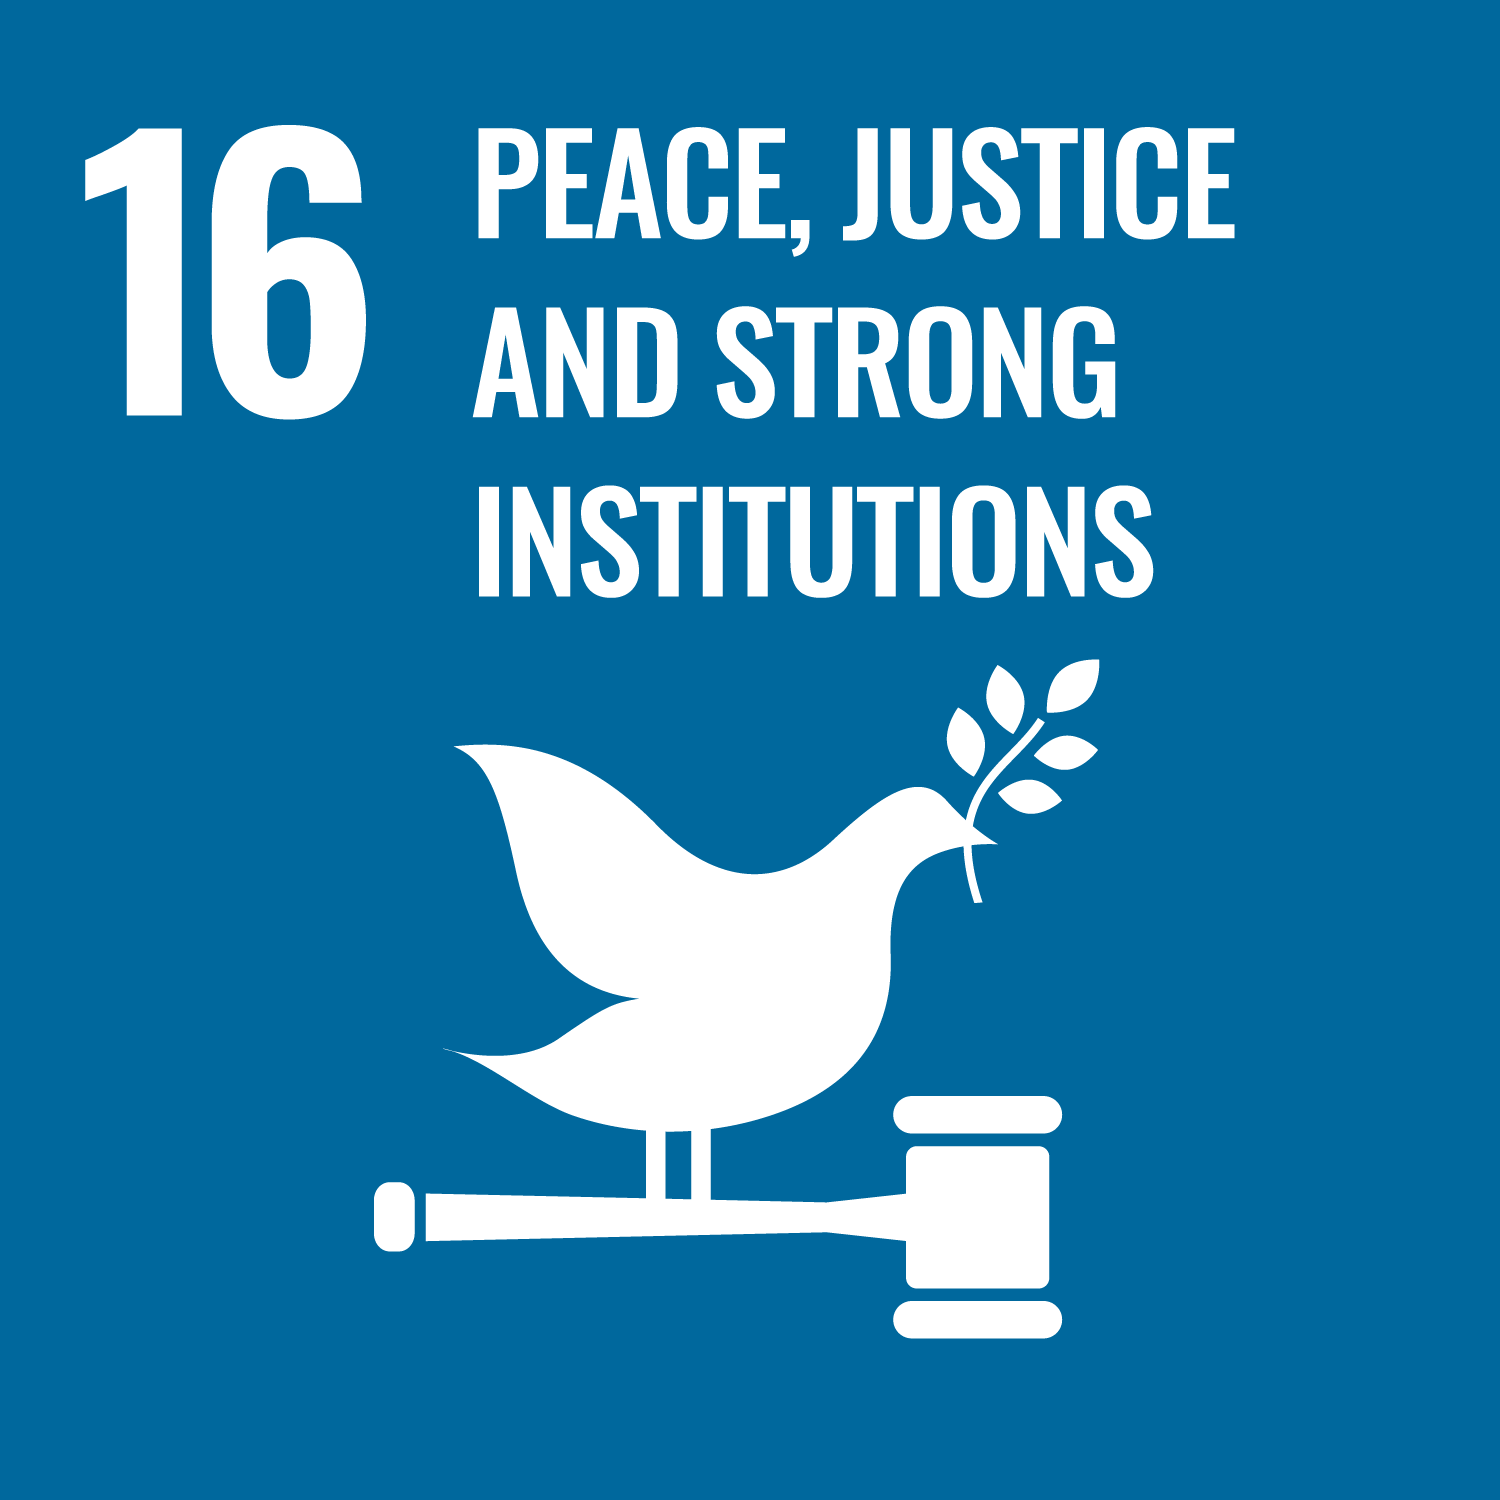 United Nation's 17 Sustainable Development Goals: Goal Number 16: Peace, Justice and Strong Institutions